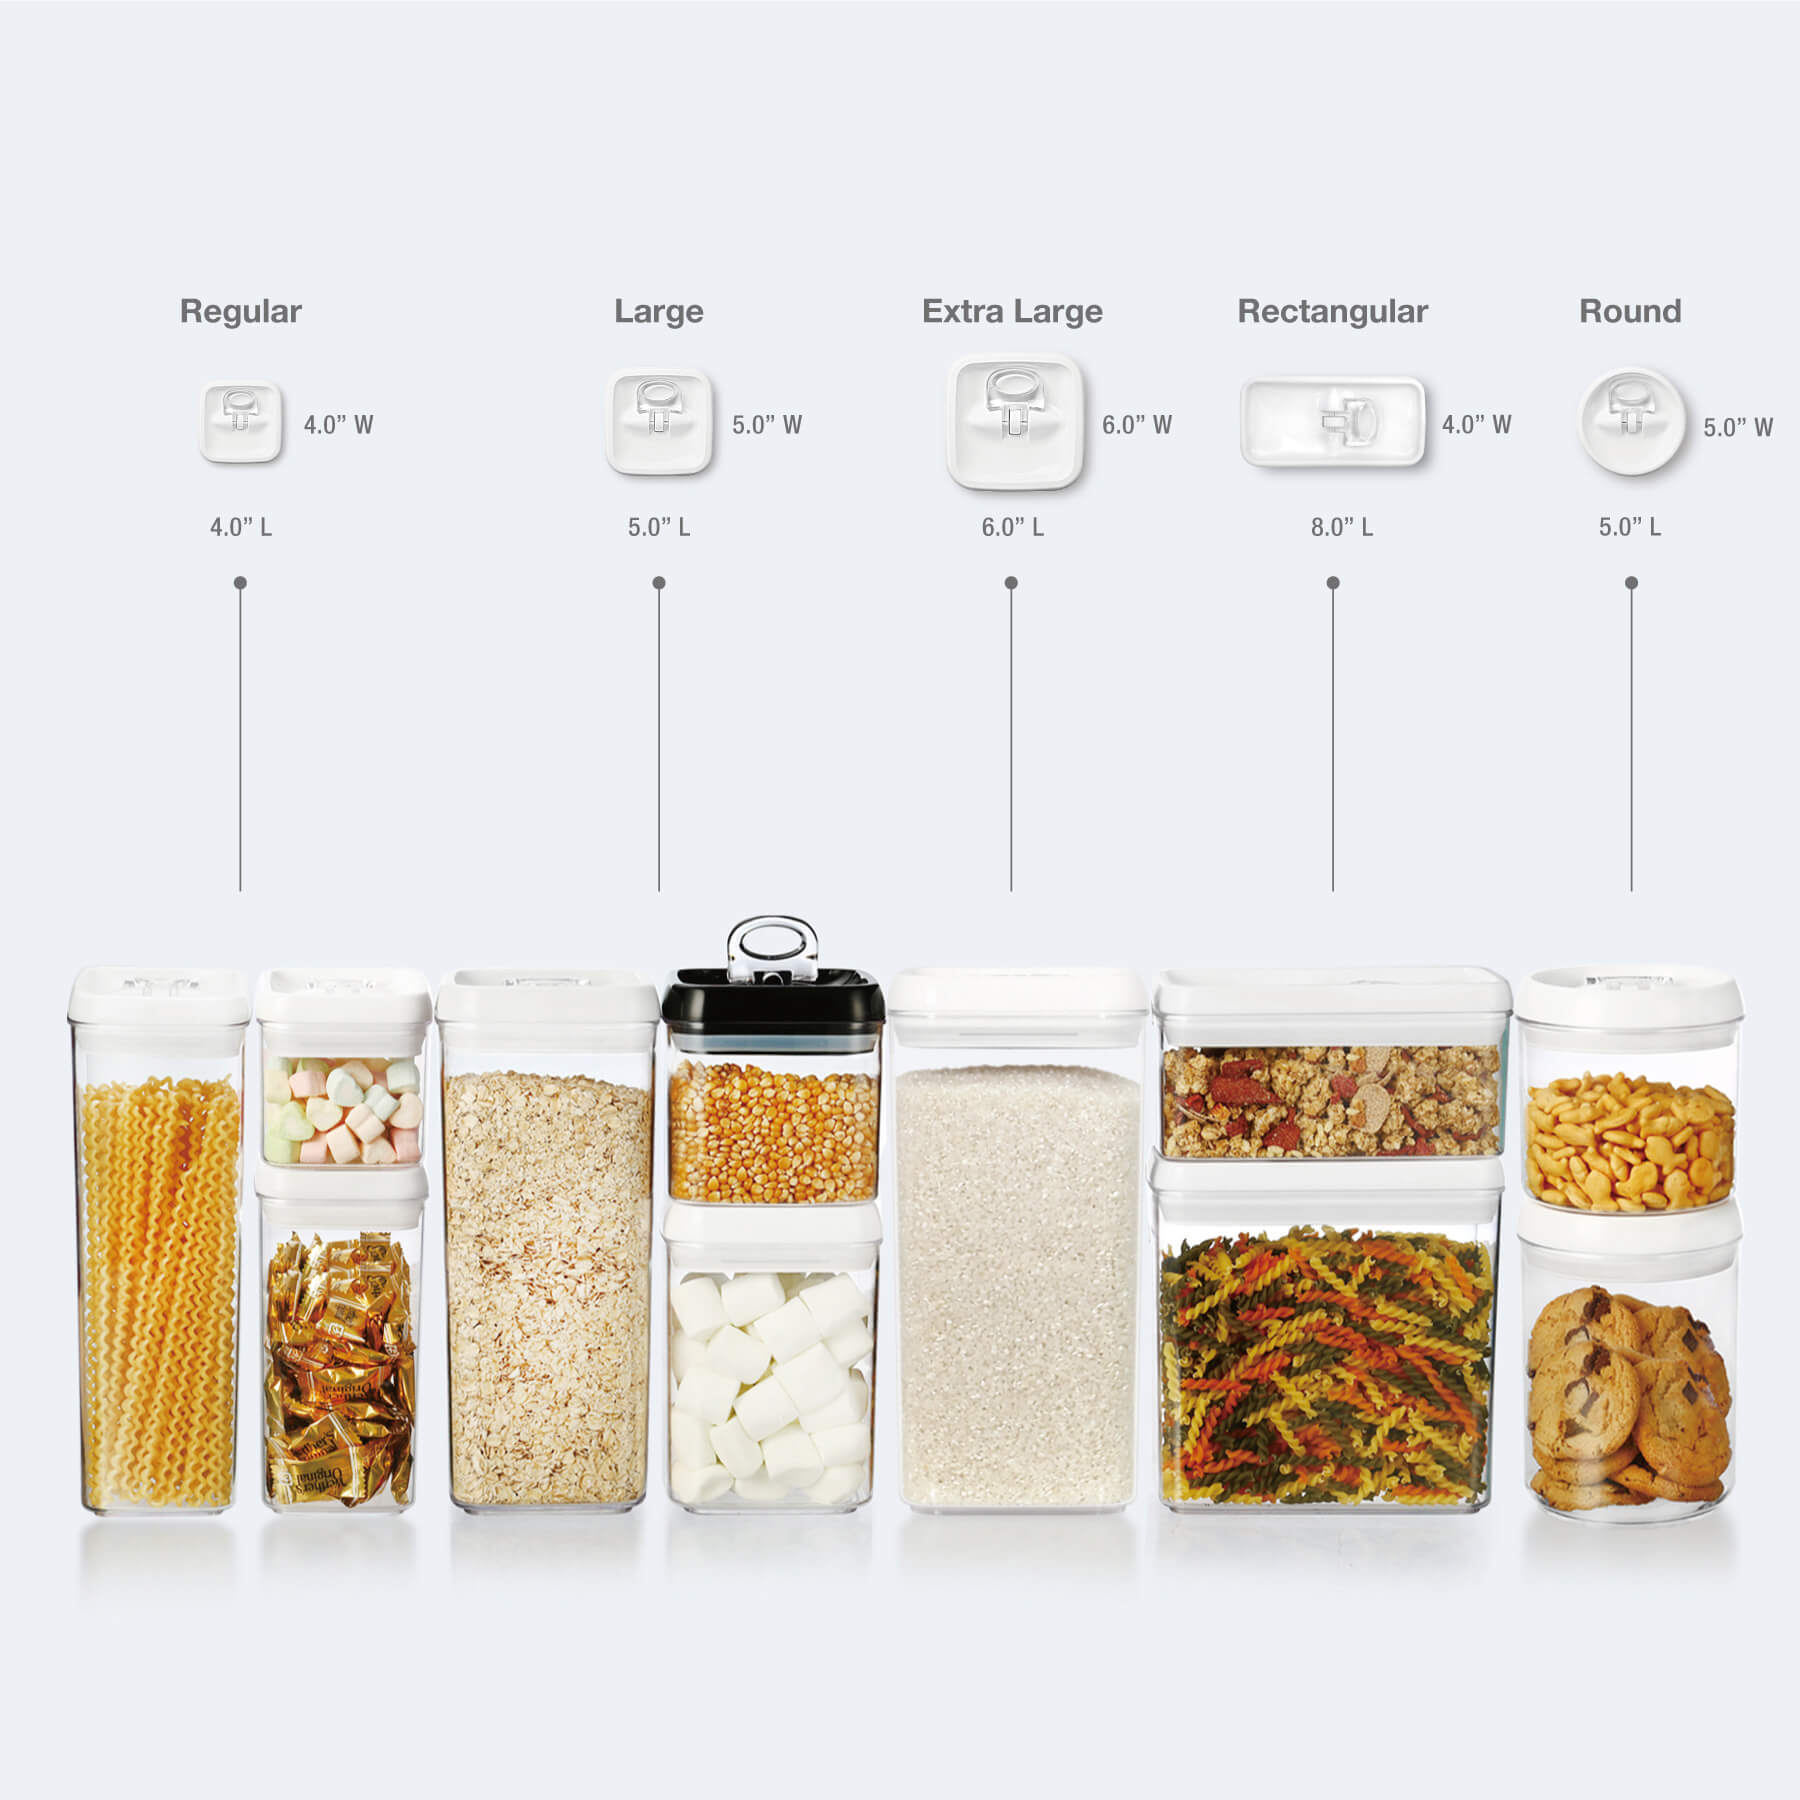 OXO Good Grips 1.1 Qt. Clear Square SAN Plastic Food Storage Container with  White POP Lid